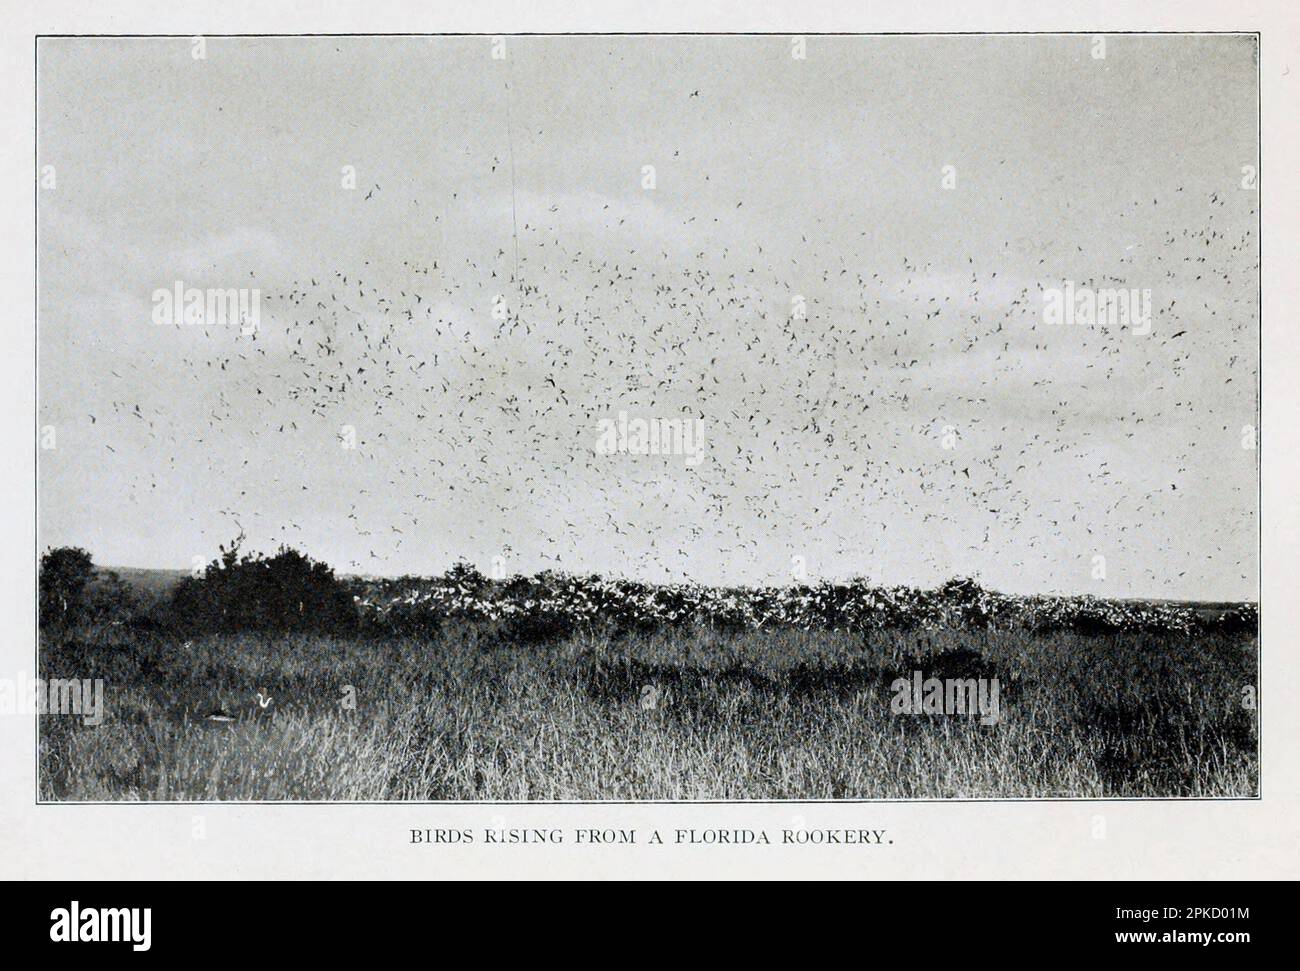 Birds Rising from a Florida Rookery from the book ' Florida, the land of enchantment ' by Nevin Otto Winter, 1869-1936 Publication date 1918 Publisher Boston, The Page Company from the ' See America First ' series Stock Photo